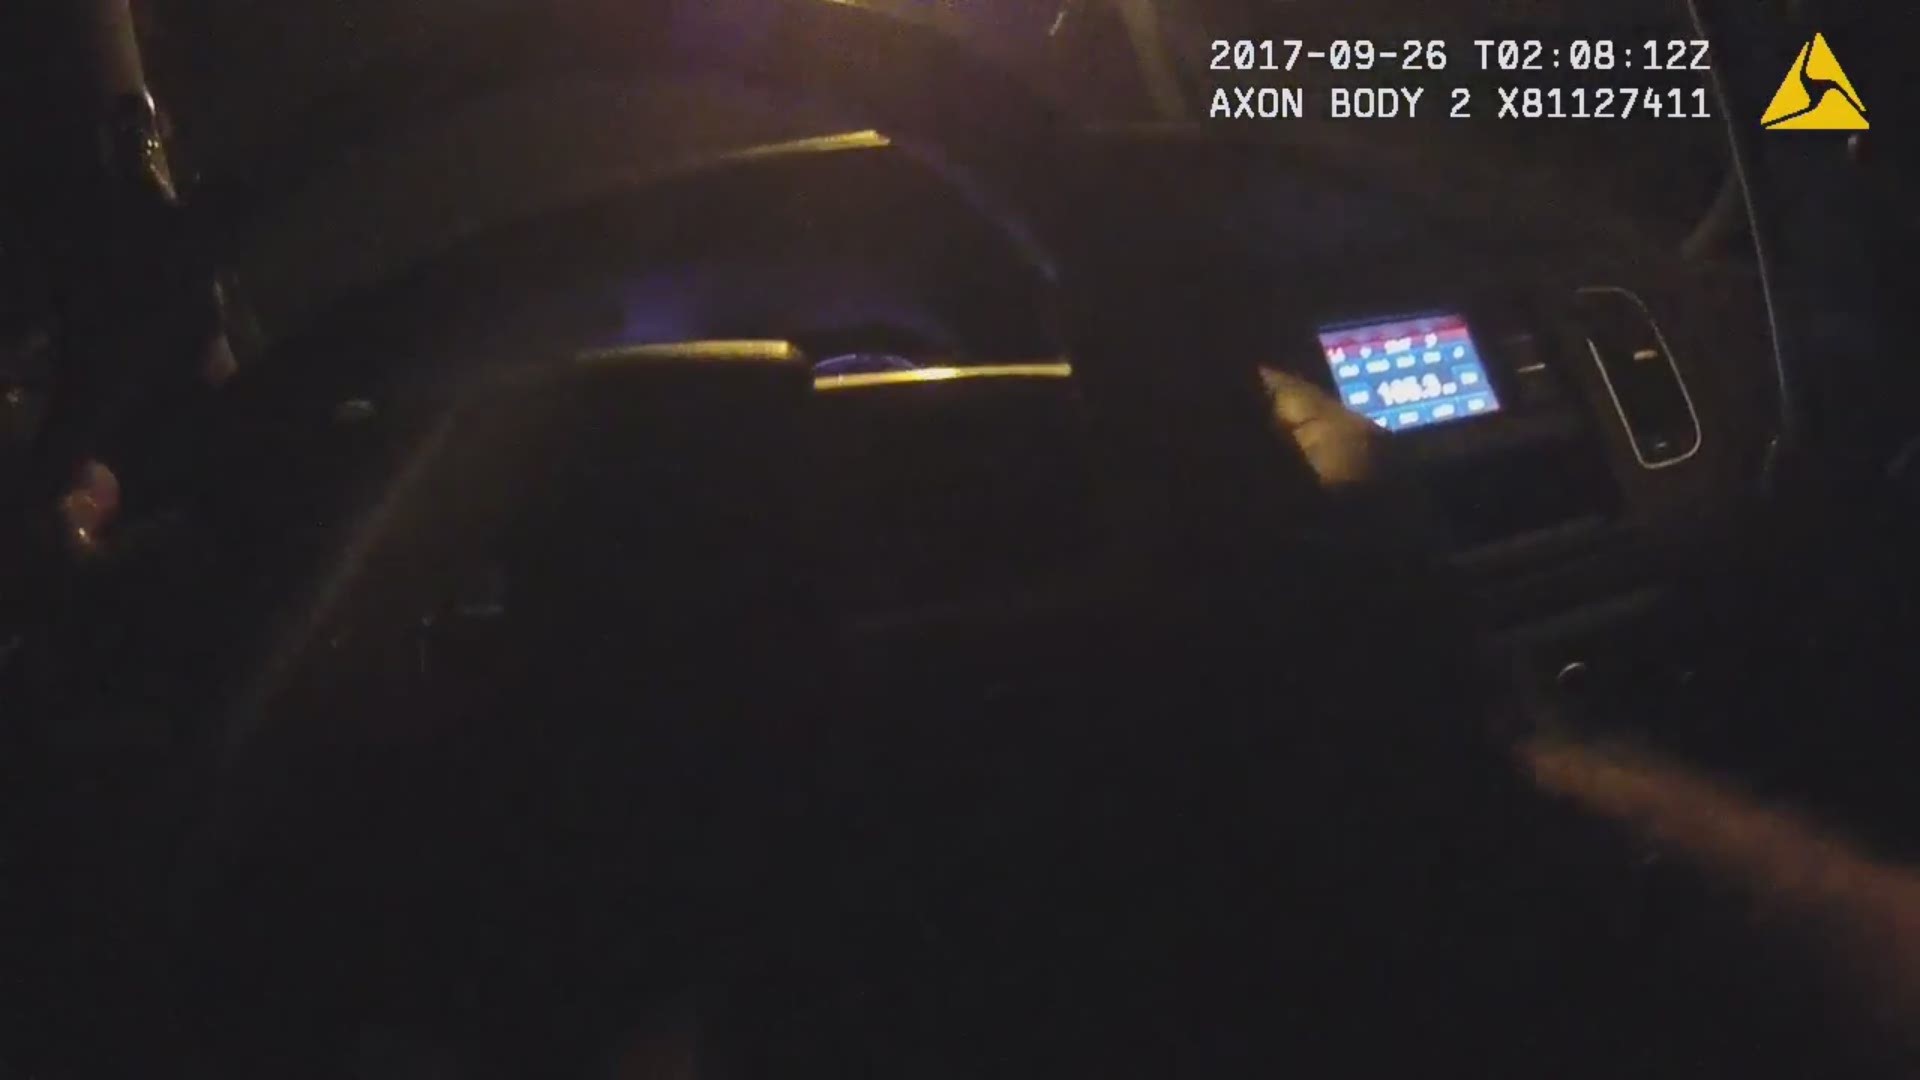 *GRAPHIC CONTENT* CMPD released the body cam footage of the officer-involved shooting that took place in September 2017.